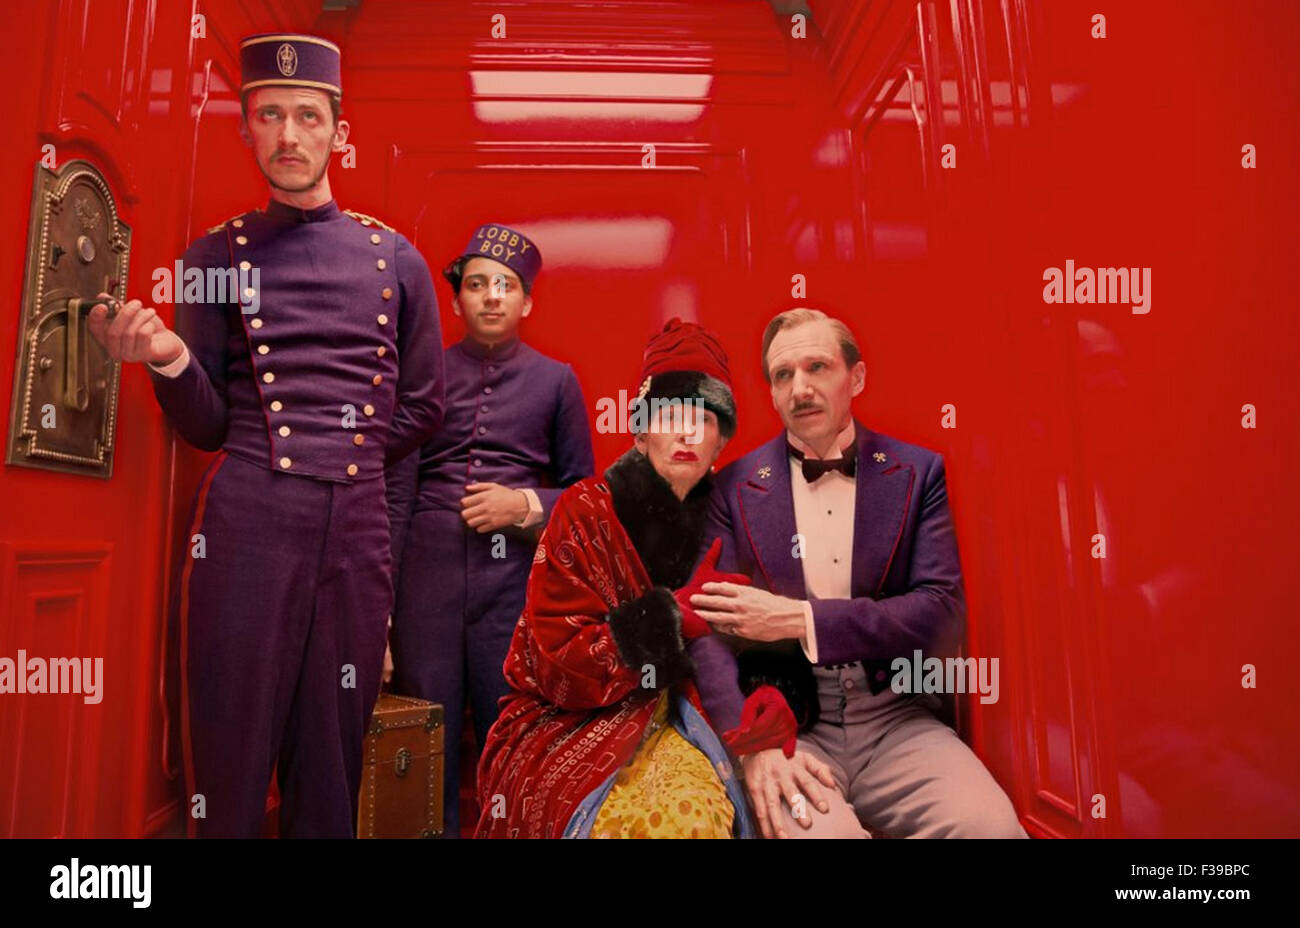 Grand Hotel Budapest High Resolution Stock Photography And Images Alamy